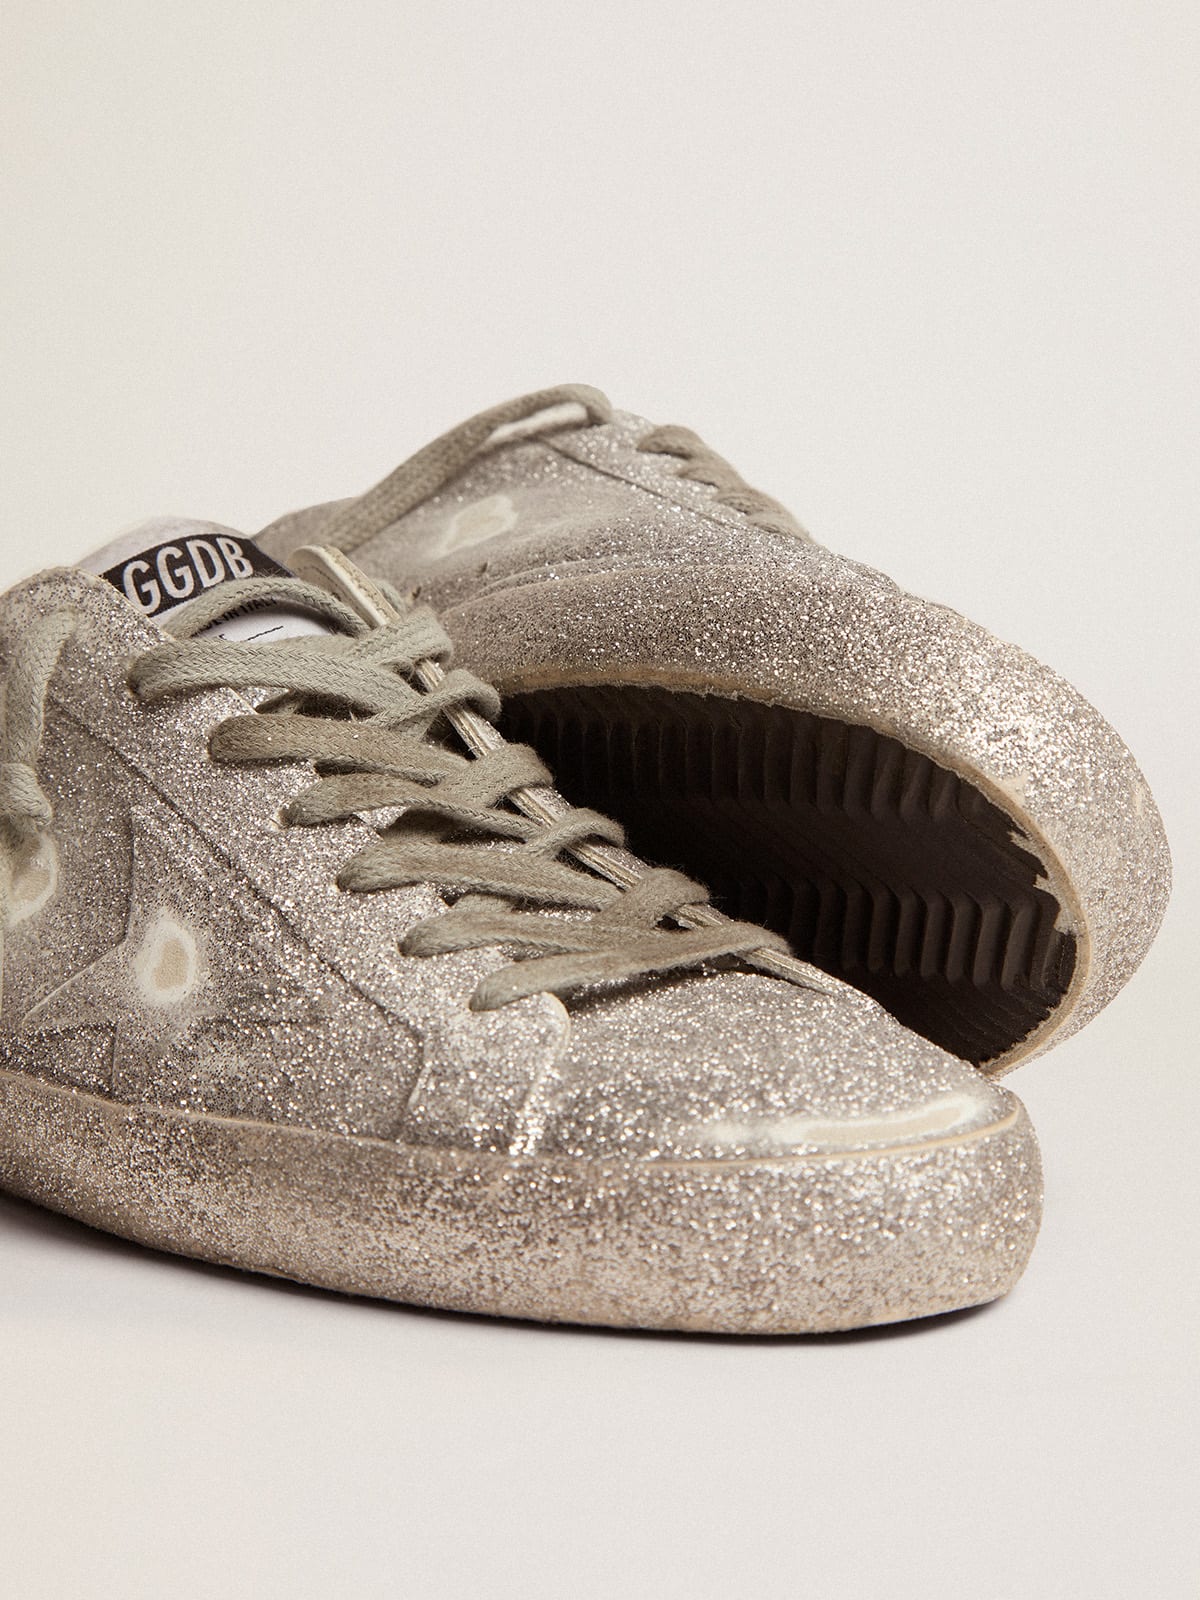 Golden Goose - Super-Star sneakers in silver leather with all-over glitter dust in 